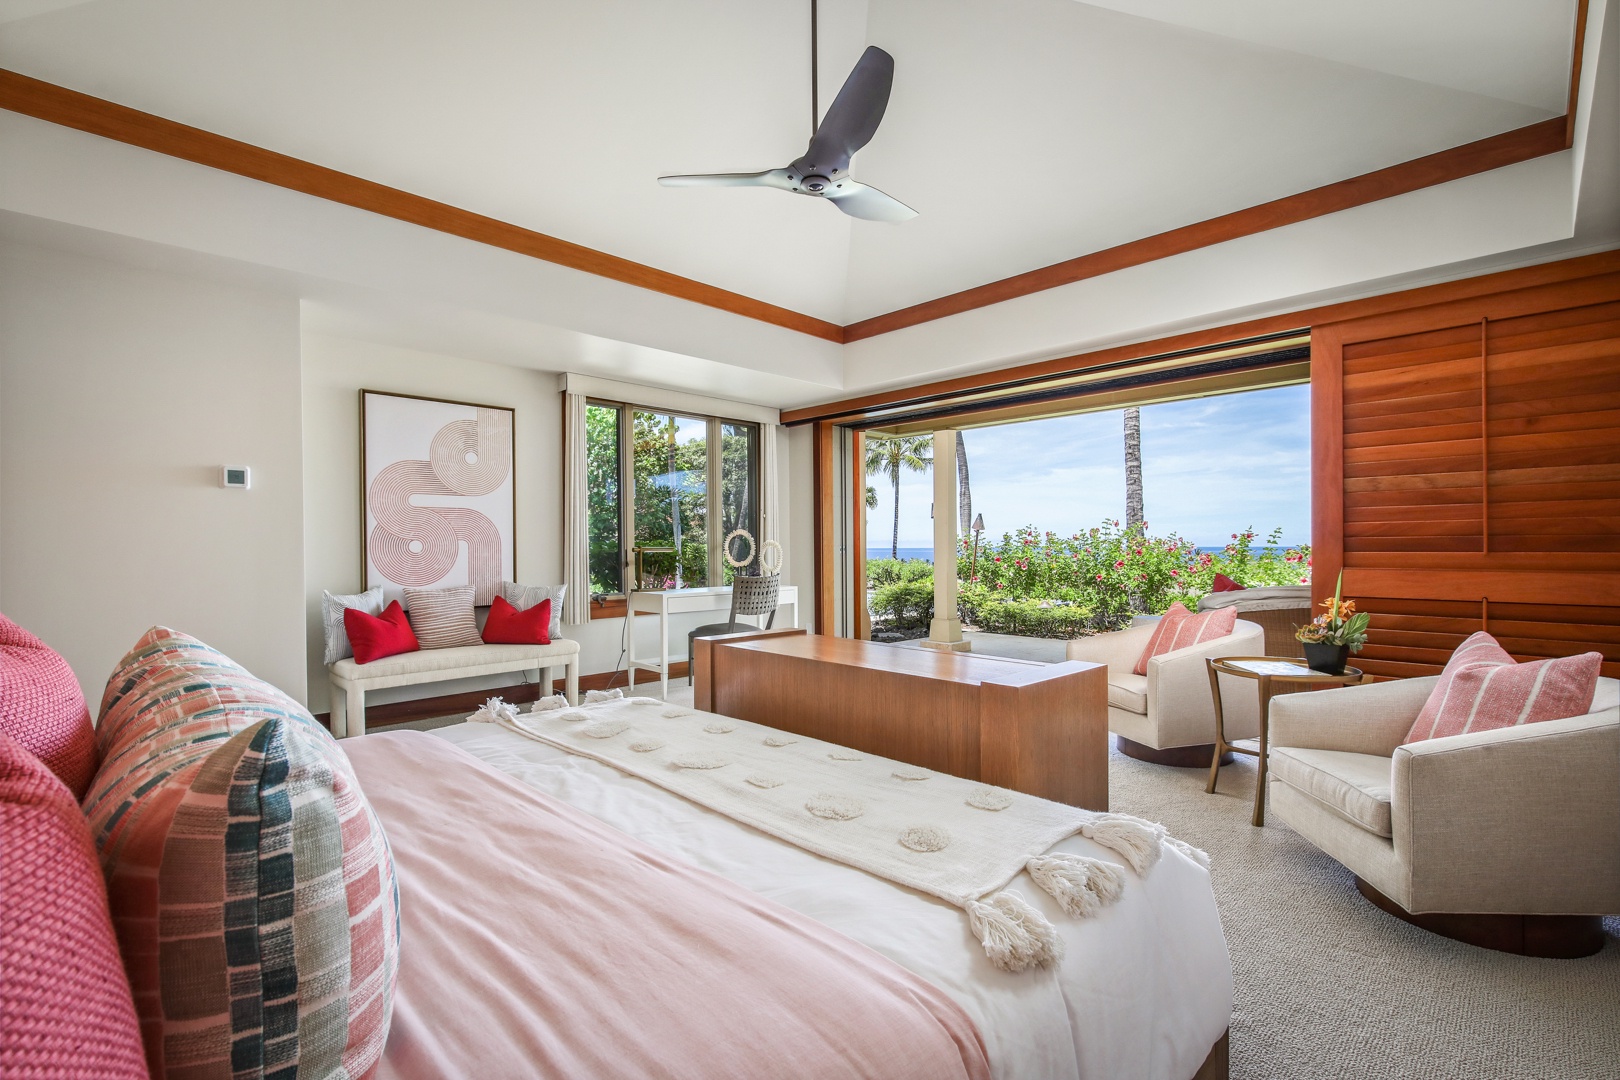 Kailua Kona Vacation Rentals, 4BD Hainoa Estate (122) at Four Seasons Resort at Hualalai - Primary bedroom suite with seating area, private lanai, en suite bath and ocean views.